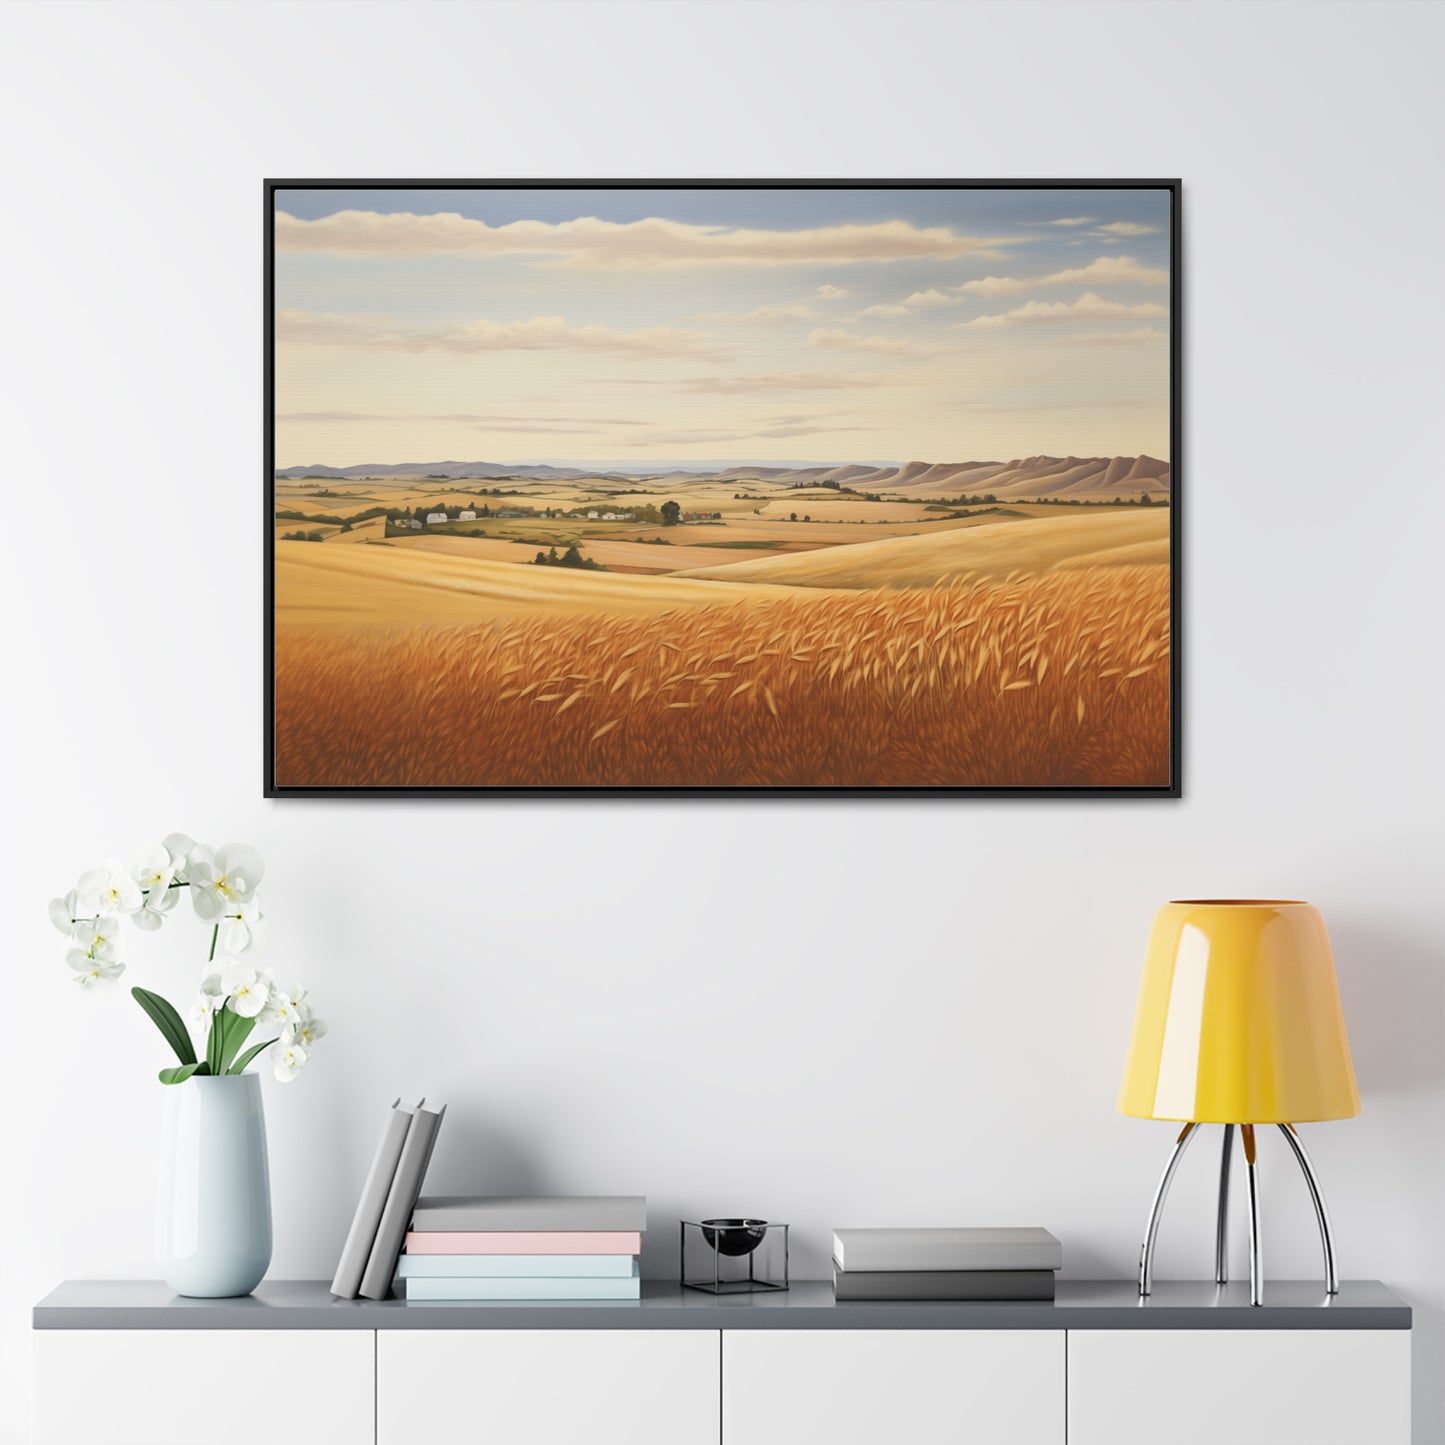 Fields of Wheat - Gallery Canvas Wrap, Horizontal Frame